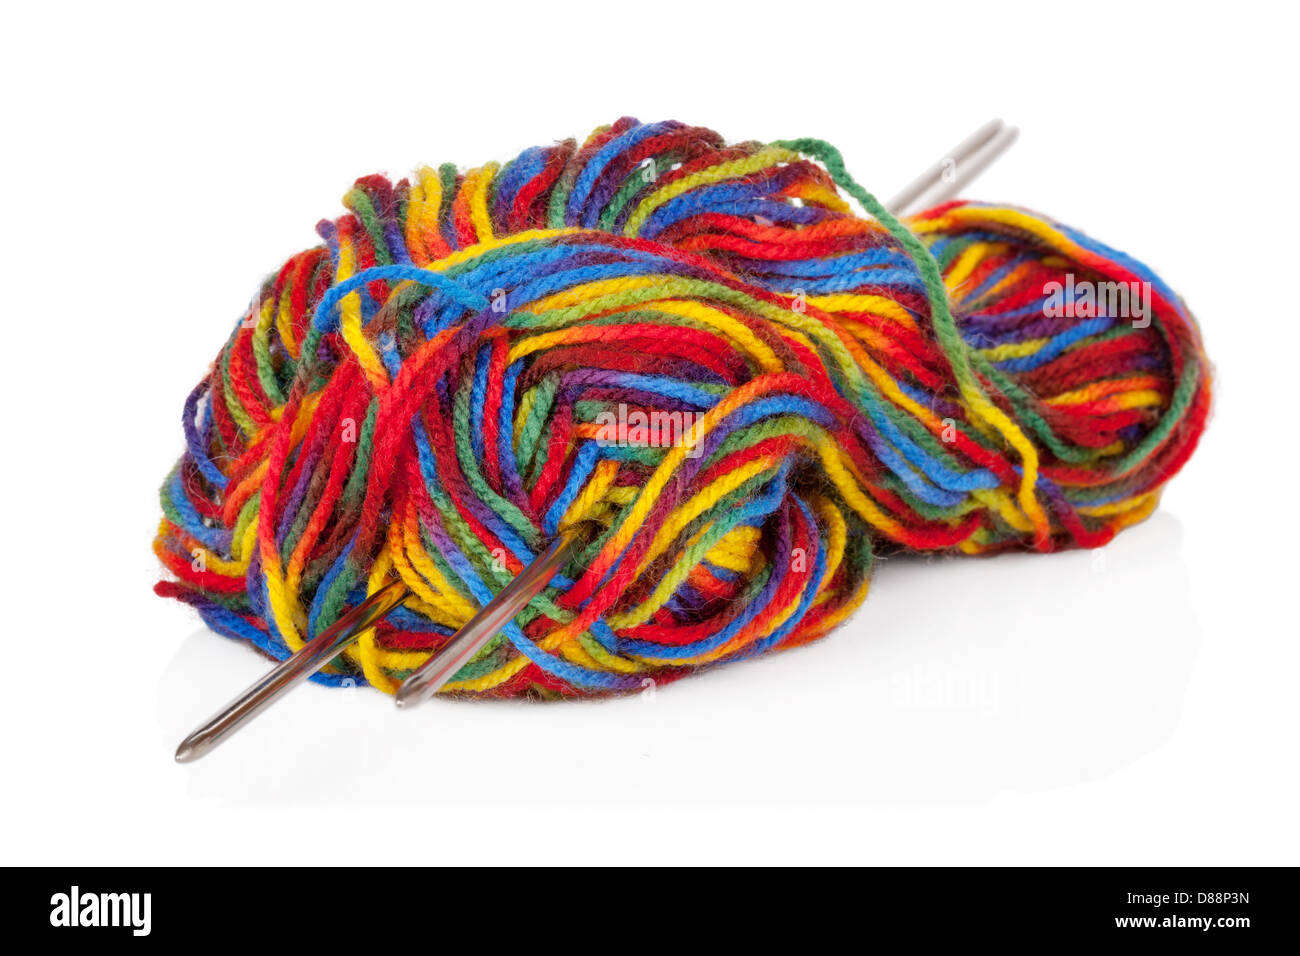 Multicolored woollen yarn or cashmere isolated on white background Stock Photo